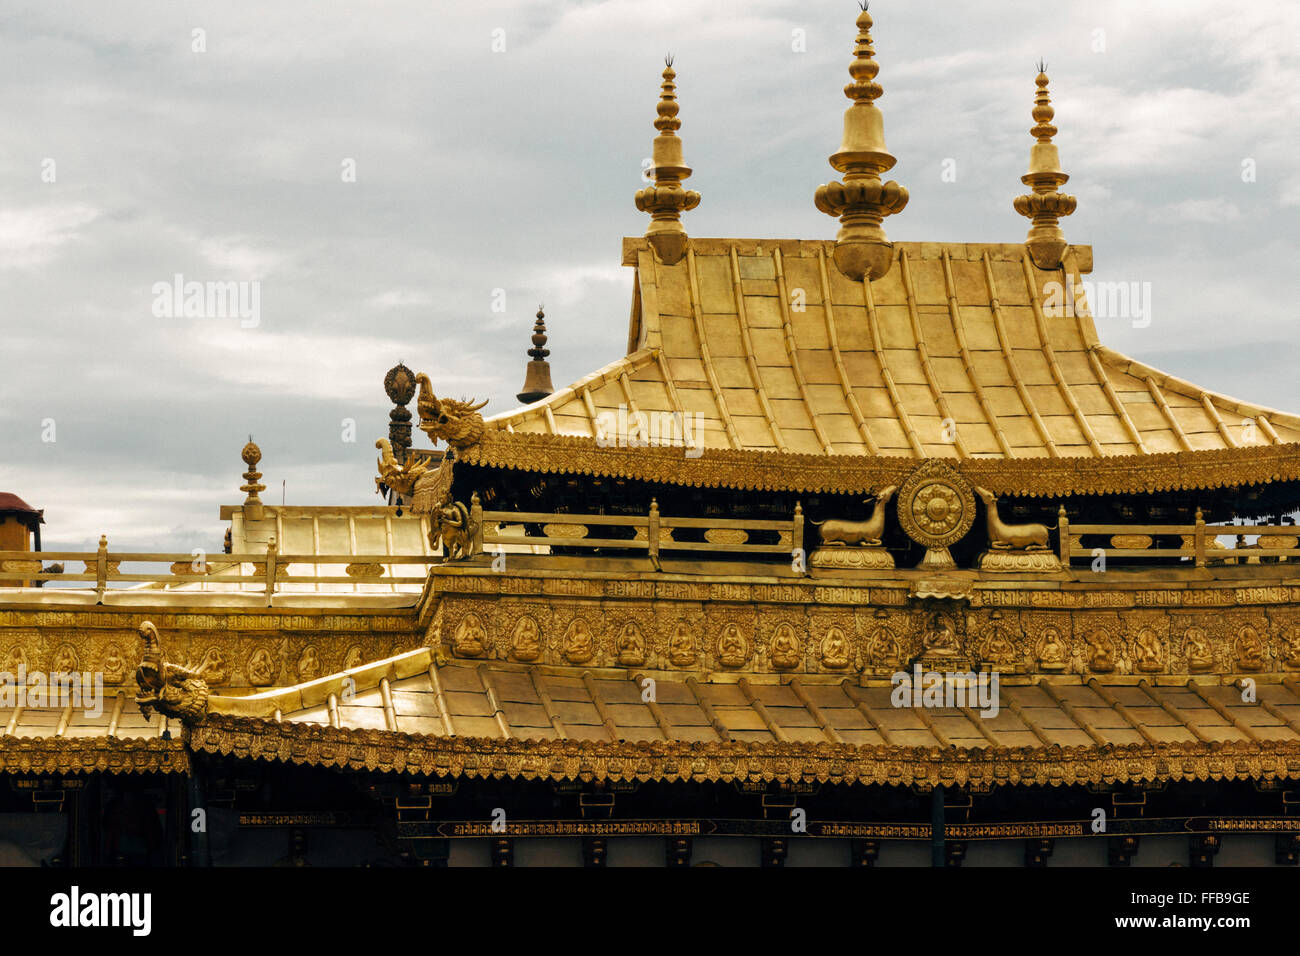 The view of the golden roof of Jokhang Temple, Lhasa, Tibet. Stock Photo